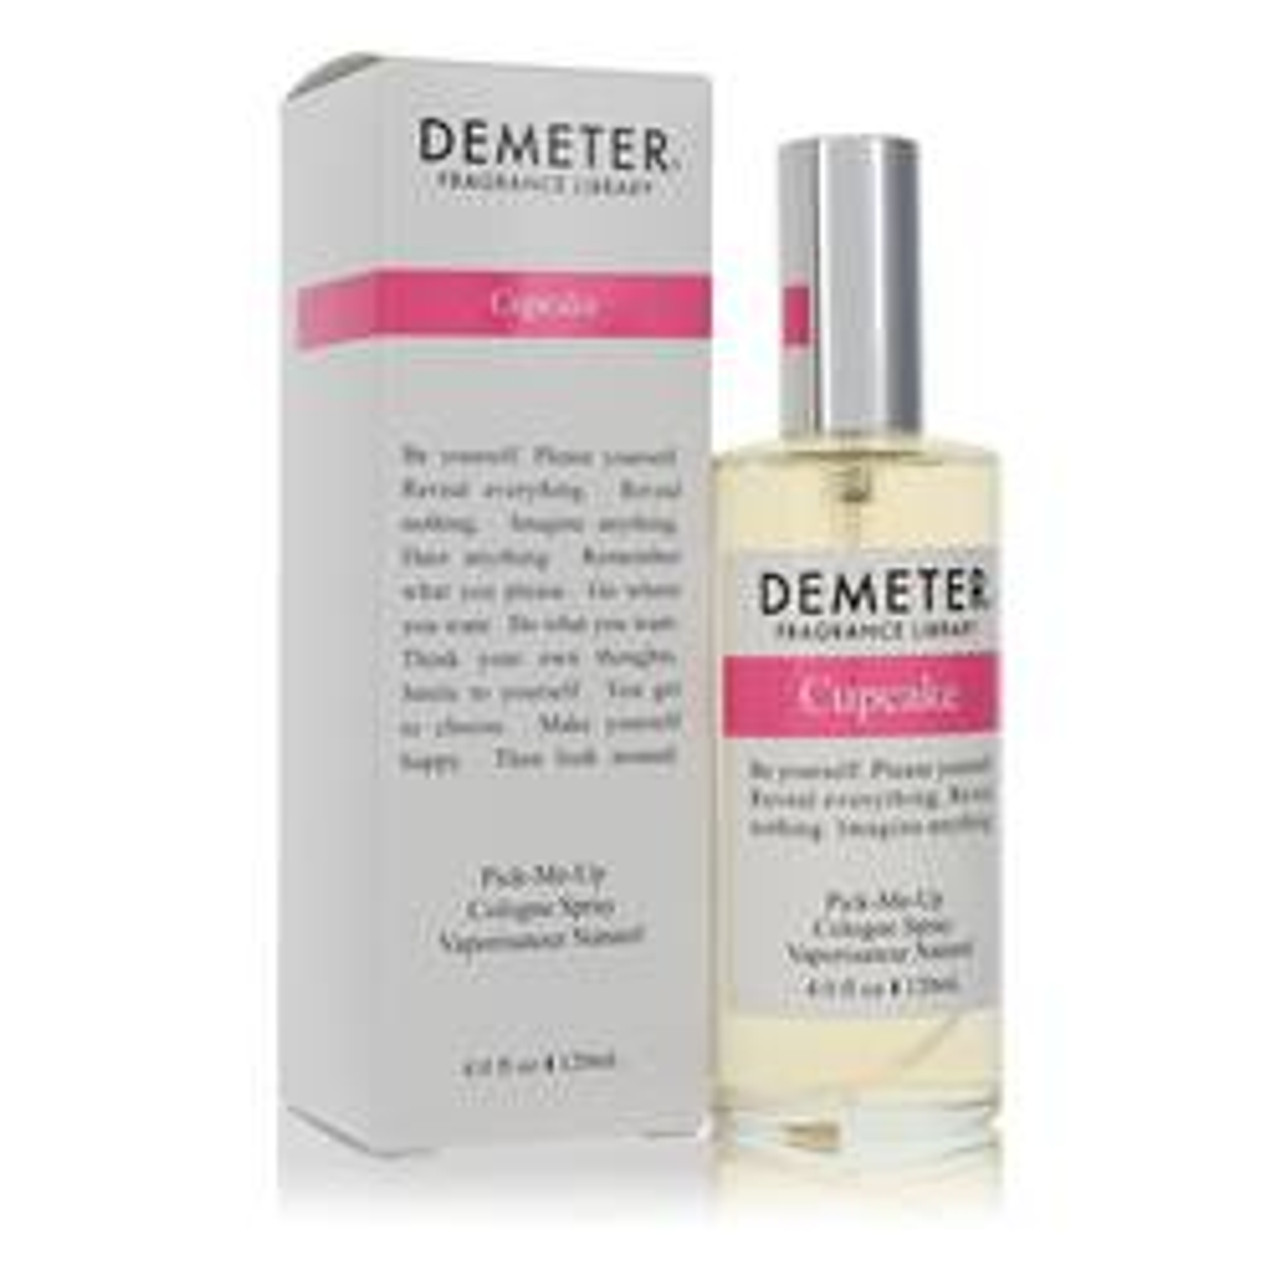 Demeter Cupcake Perfume By Demeter Cologne Spray 4 oz for Women - [From 79.50 - Choose pk Qty ] - *Ships from Miami